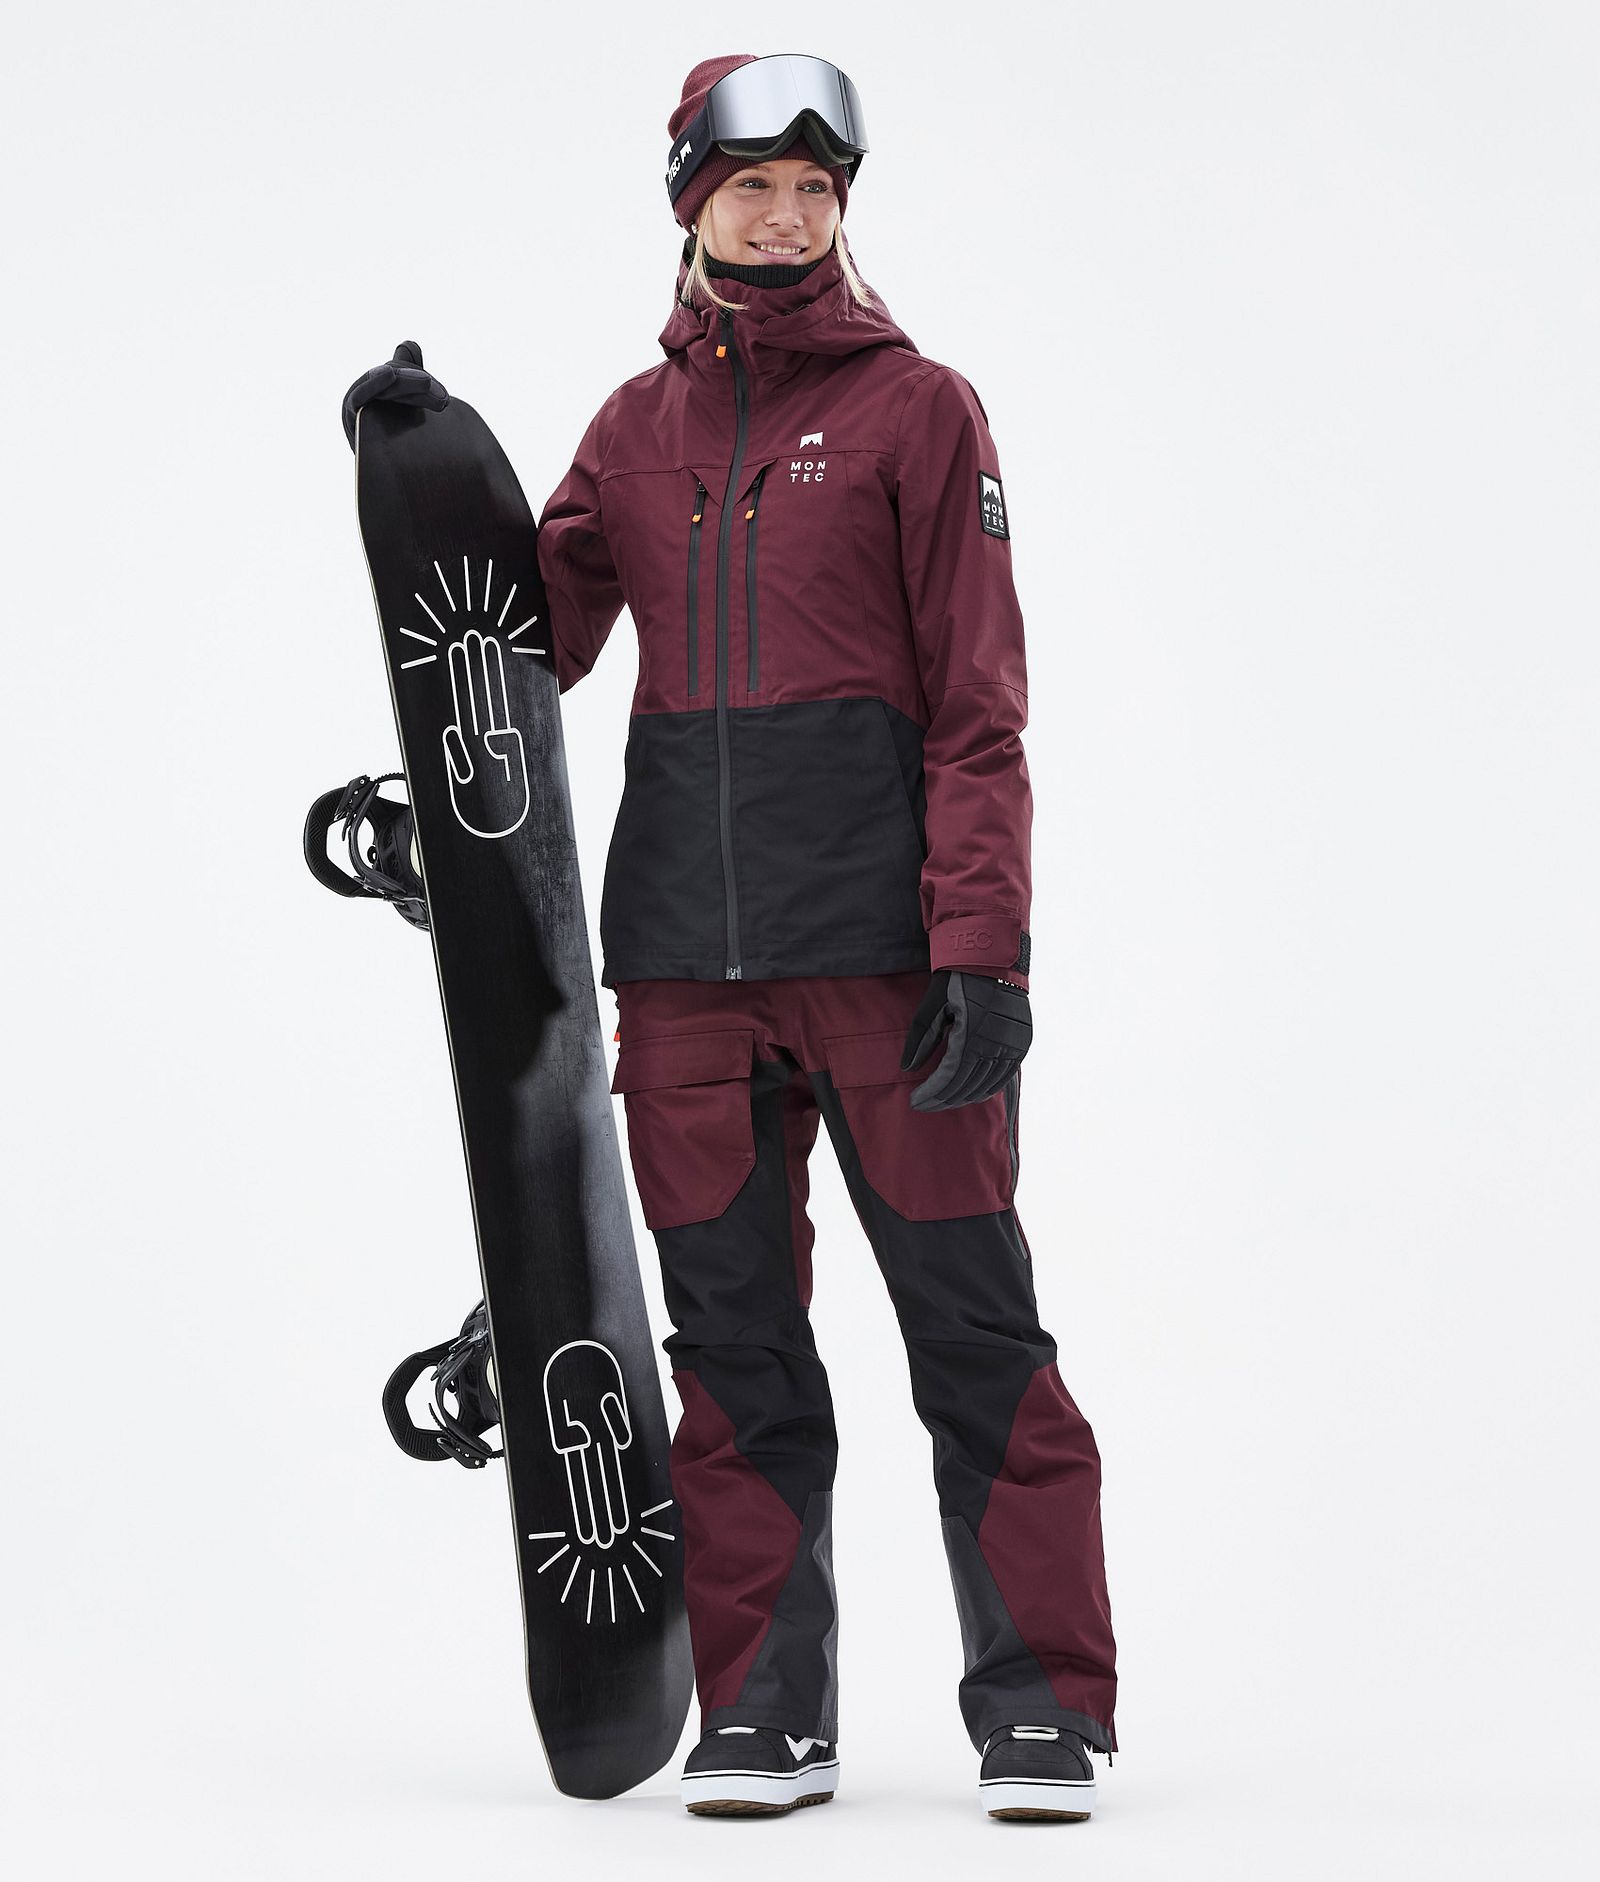 Moss W Snowboard Outfit Women Burgundy/Black, Image 1 of 2